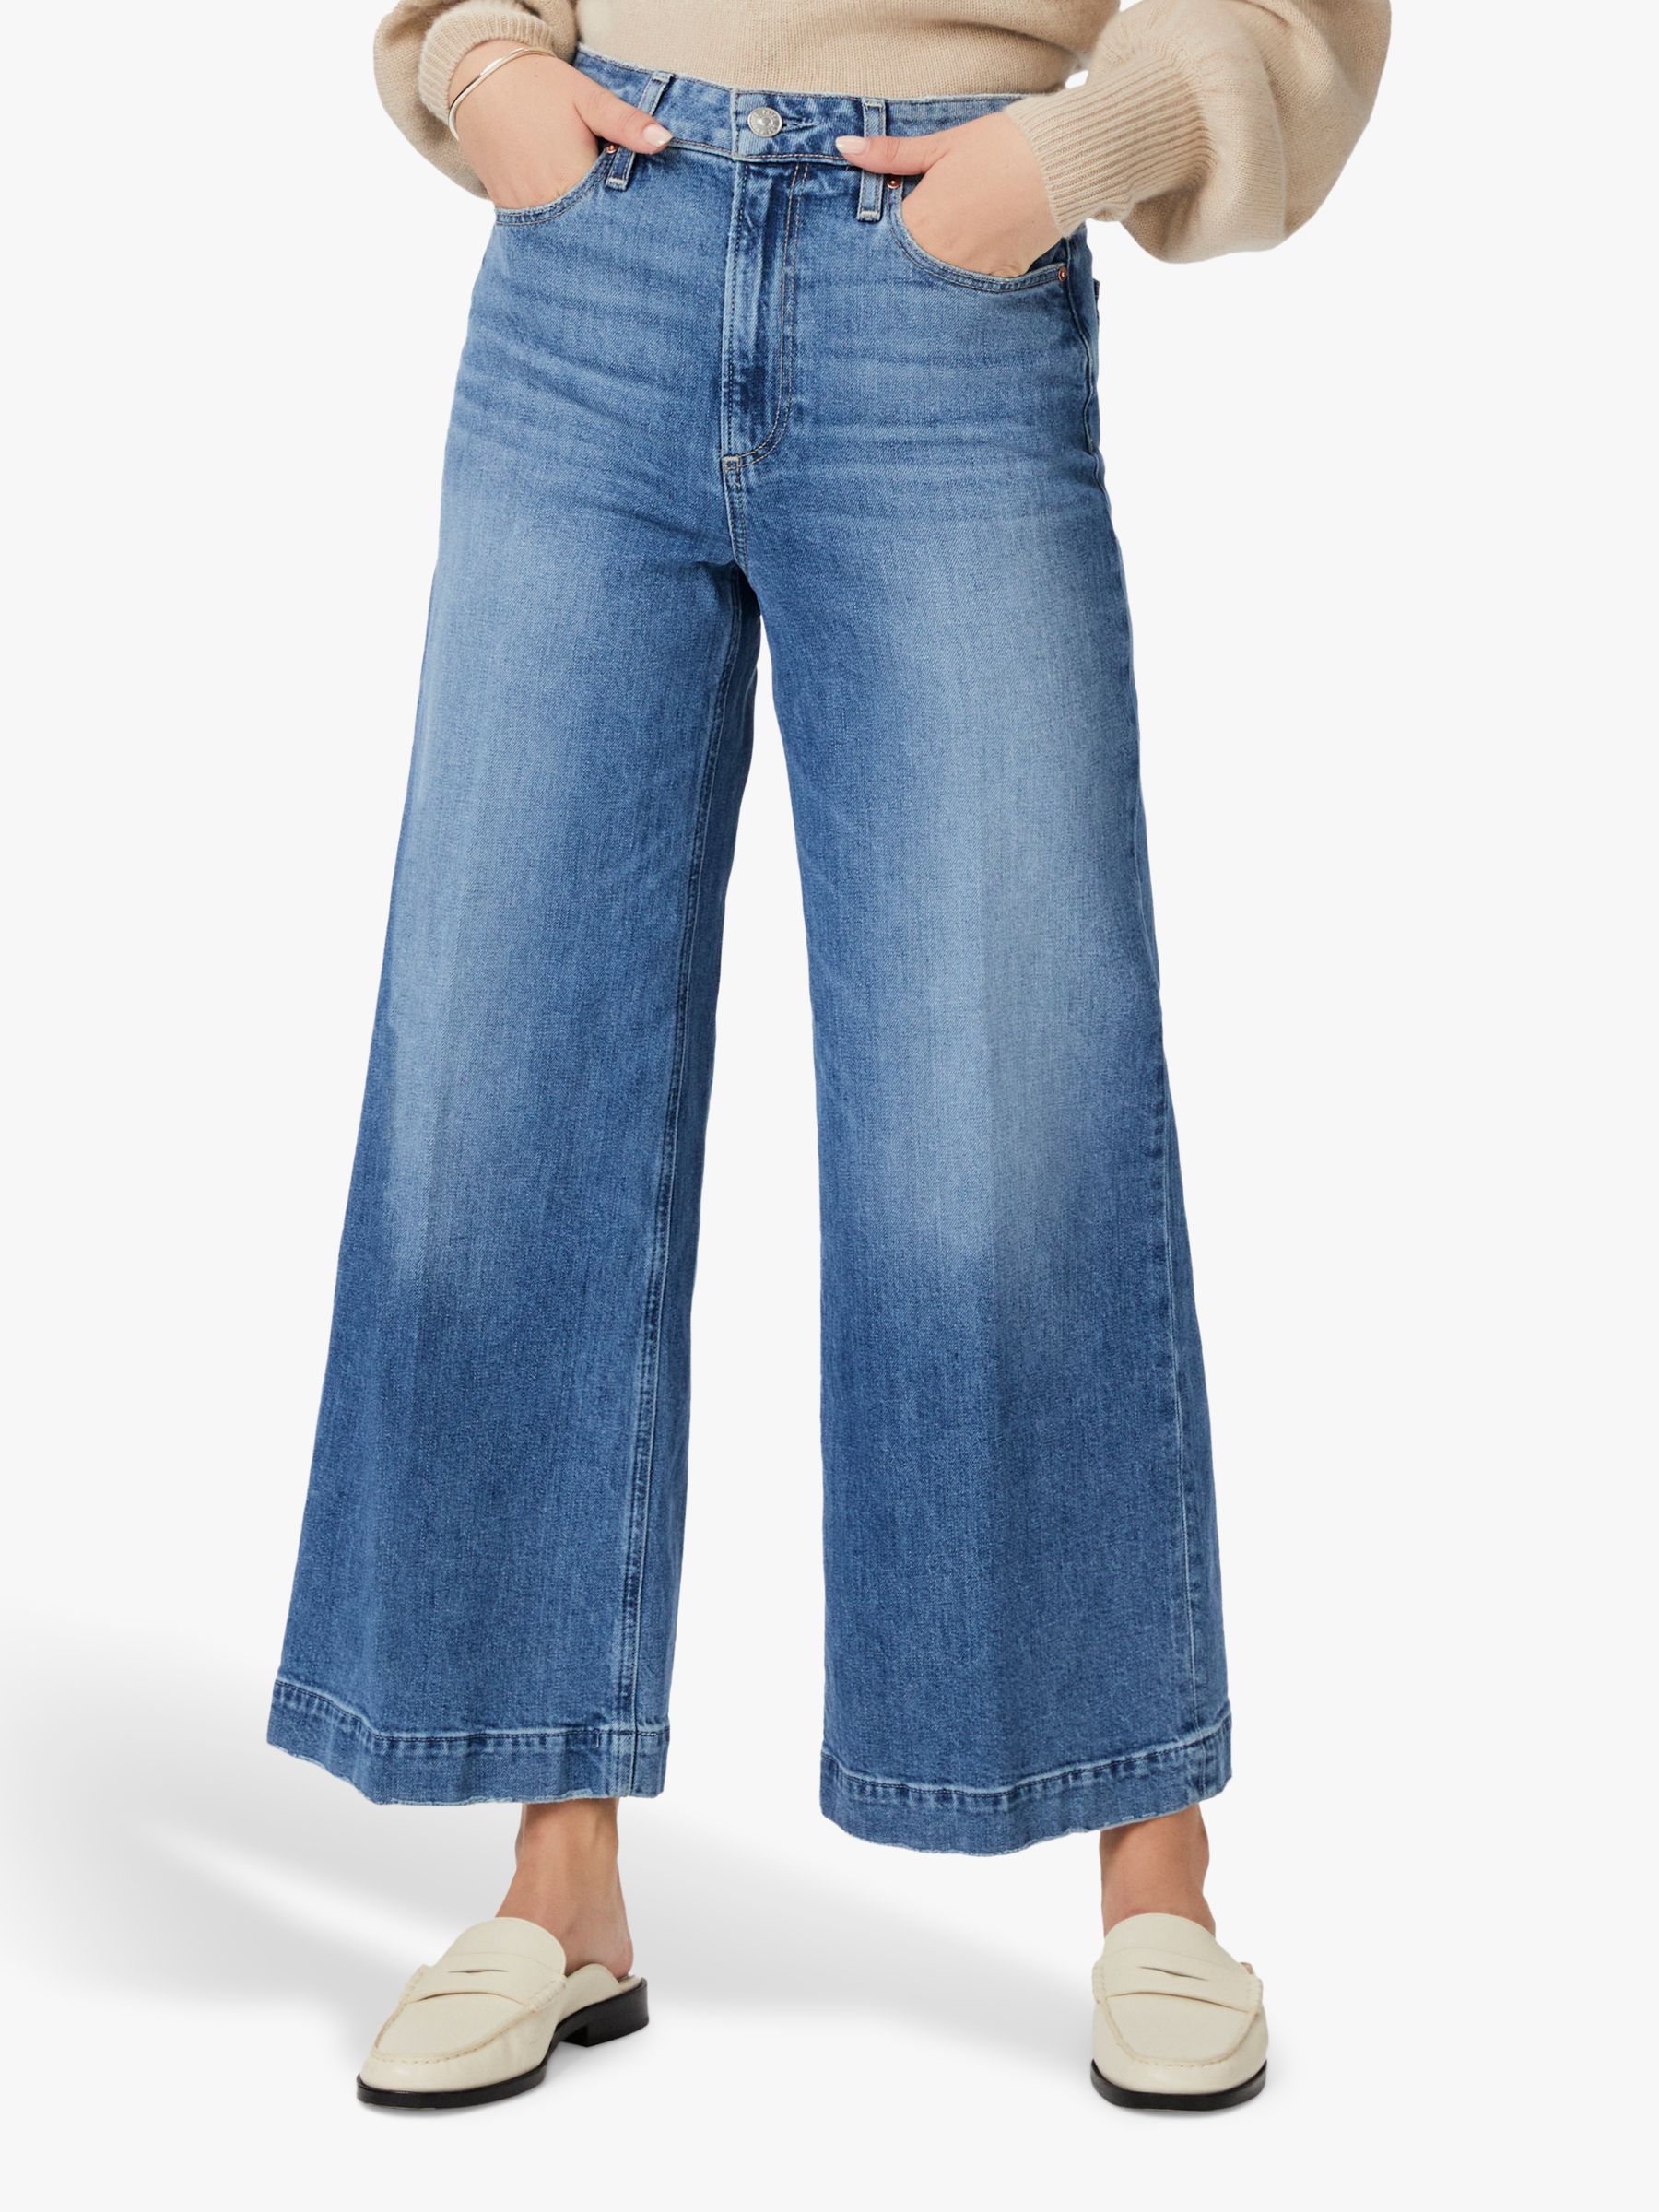 PAIGE Harper Wide Leg Ankle Jeans, Stronghold at John Lewis & Partners